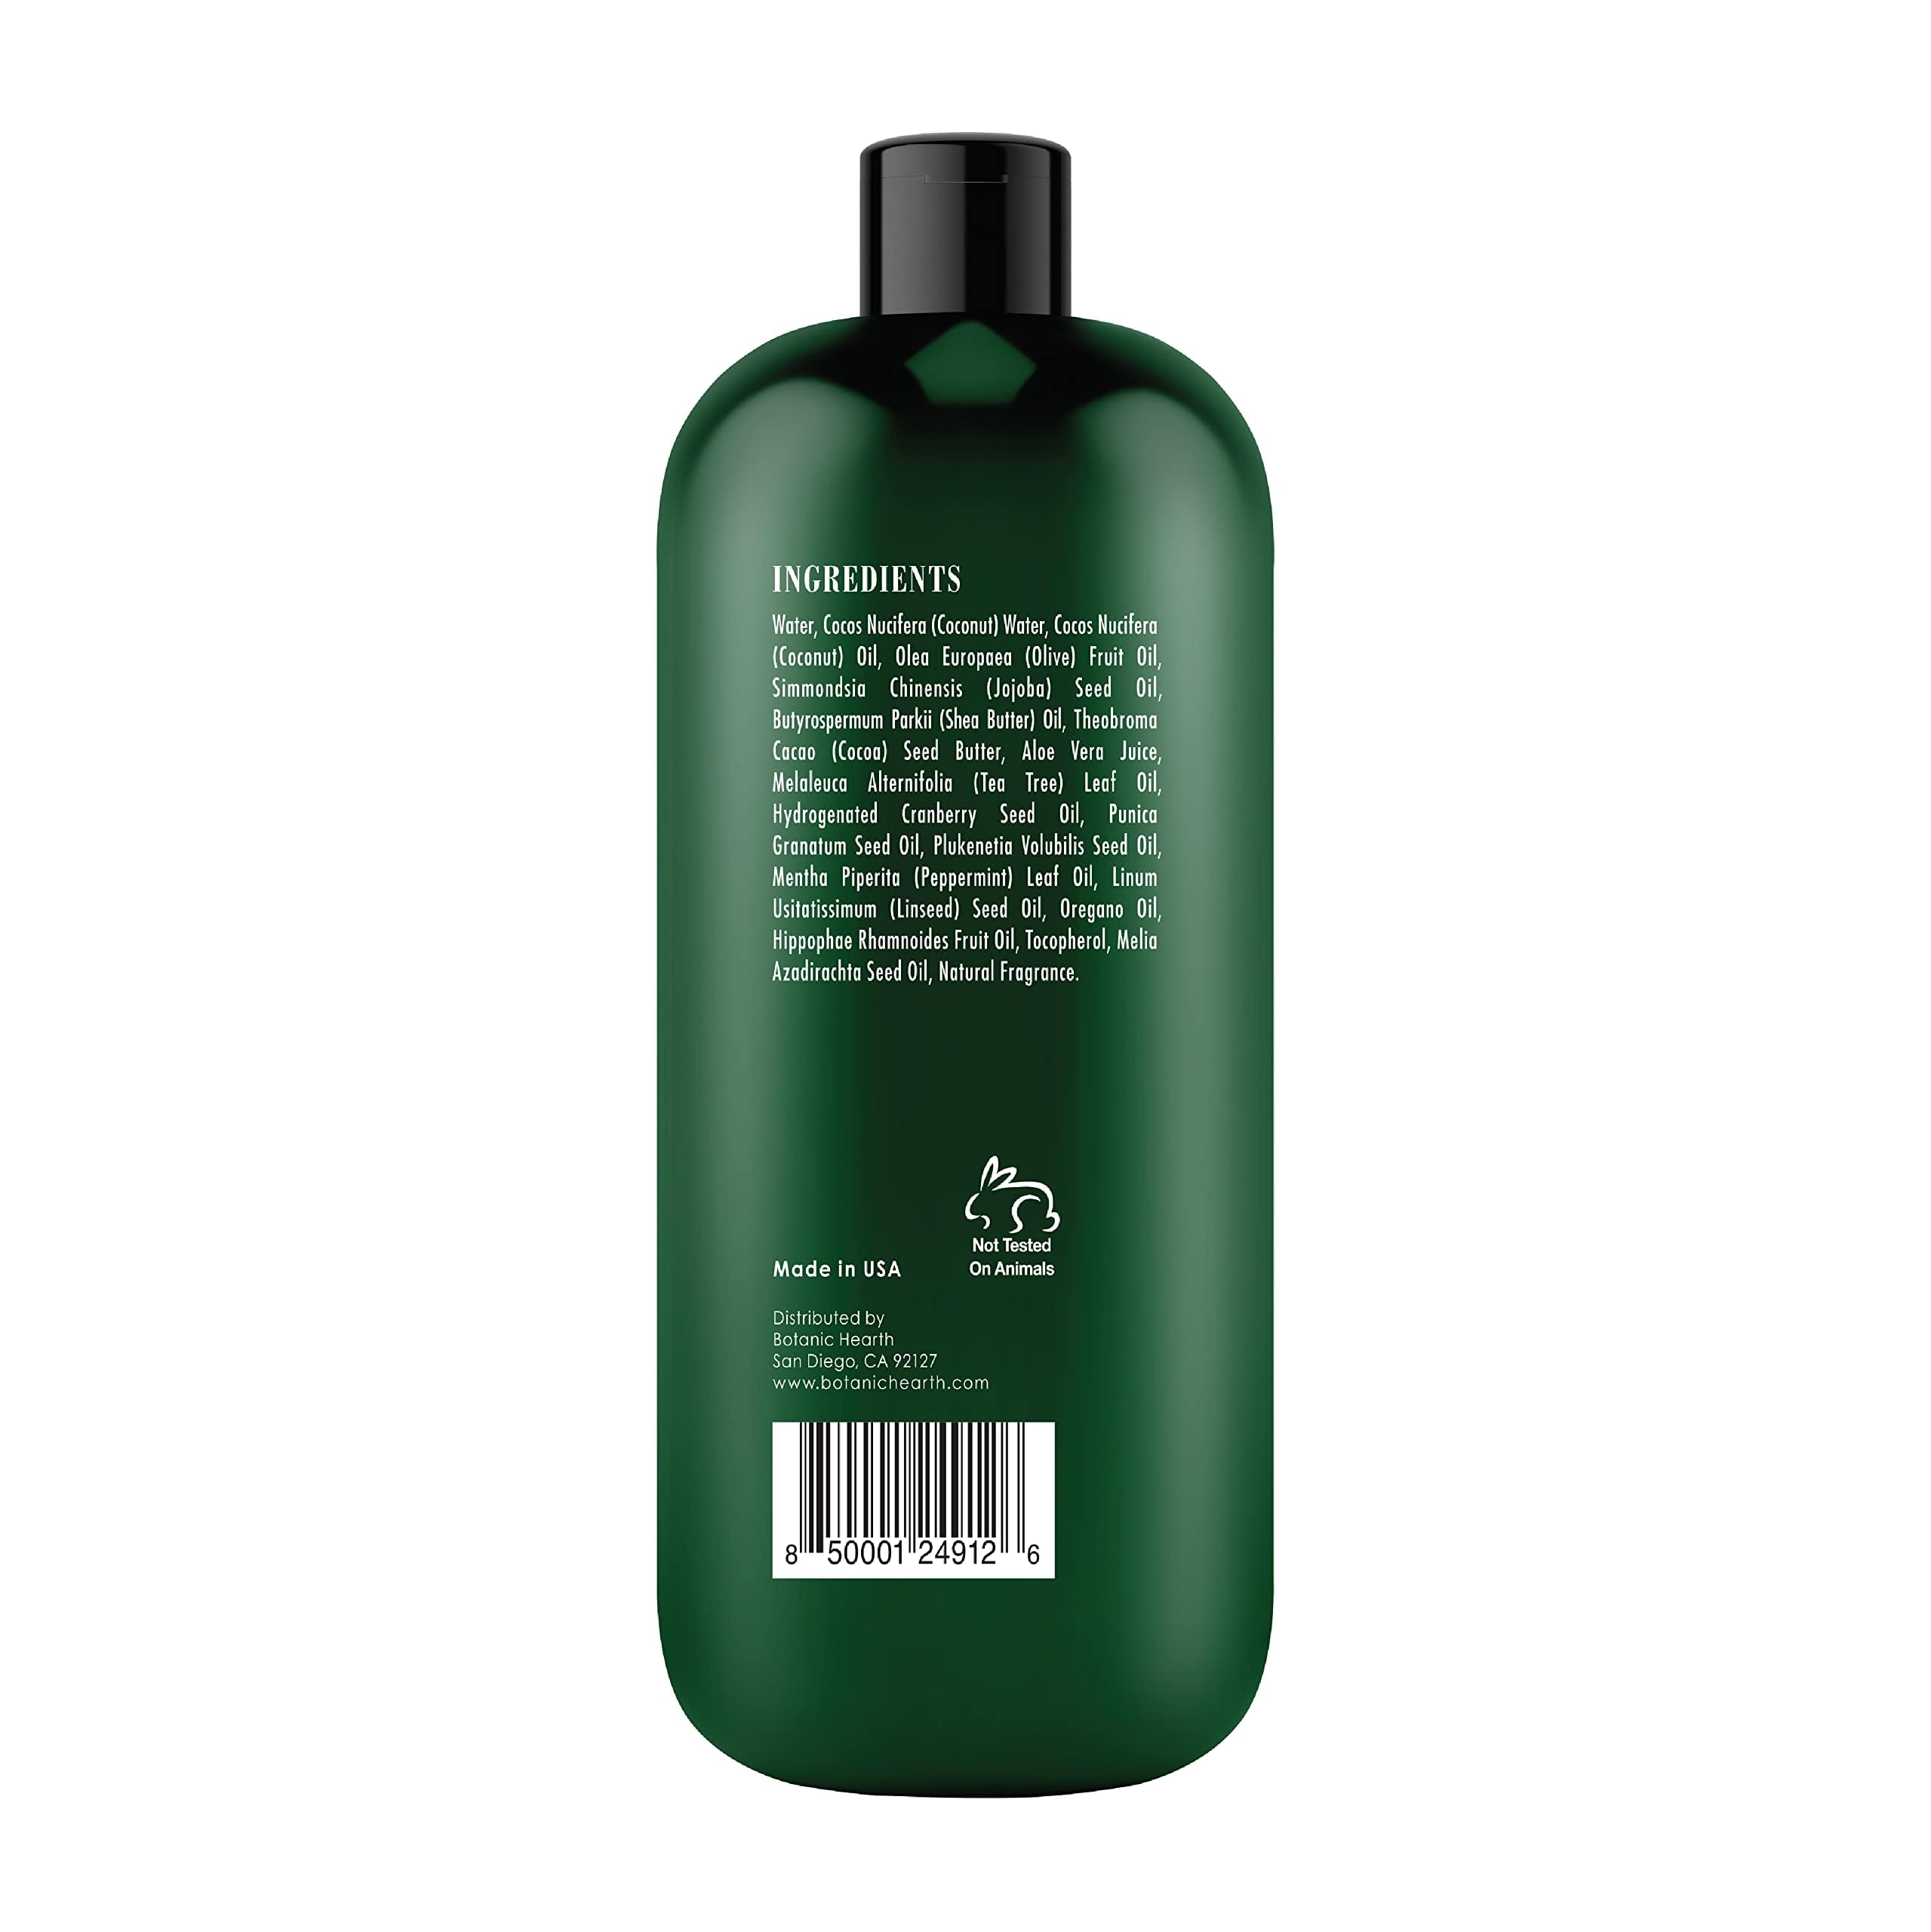 Botanic Hearth Tea Tree Body Wash, Helps with Nails, Athletes Foot, Ringworms, Jock Itch, Acne, Eczema & Body Odor, Soothes Itching & Promotes Healthy Skin and Feet, Naturally Scented, 16 fl oz